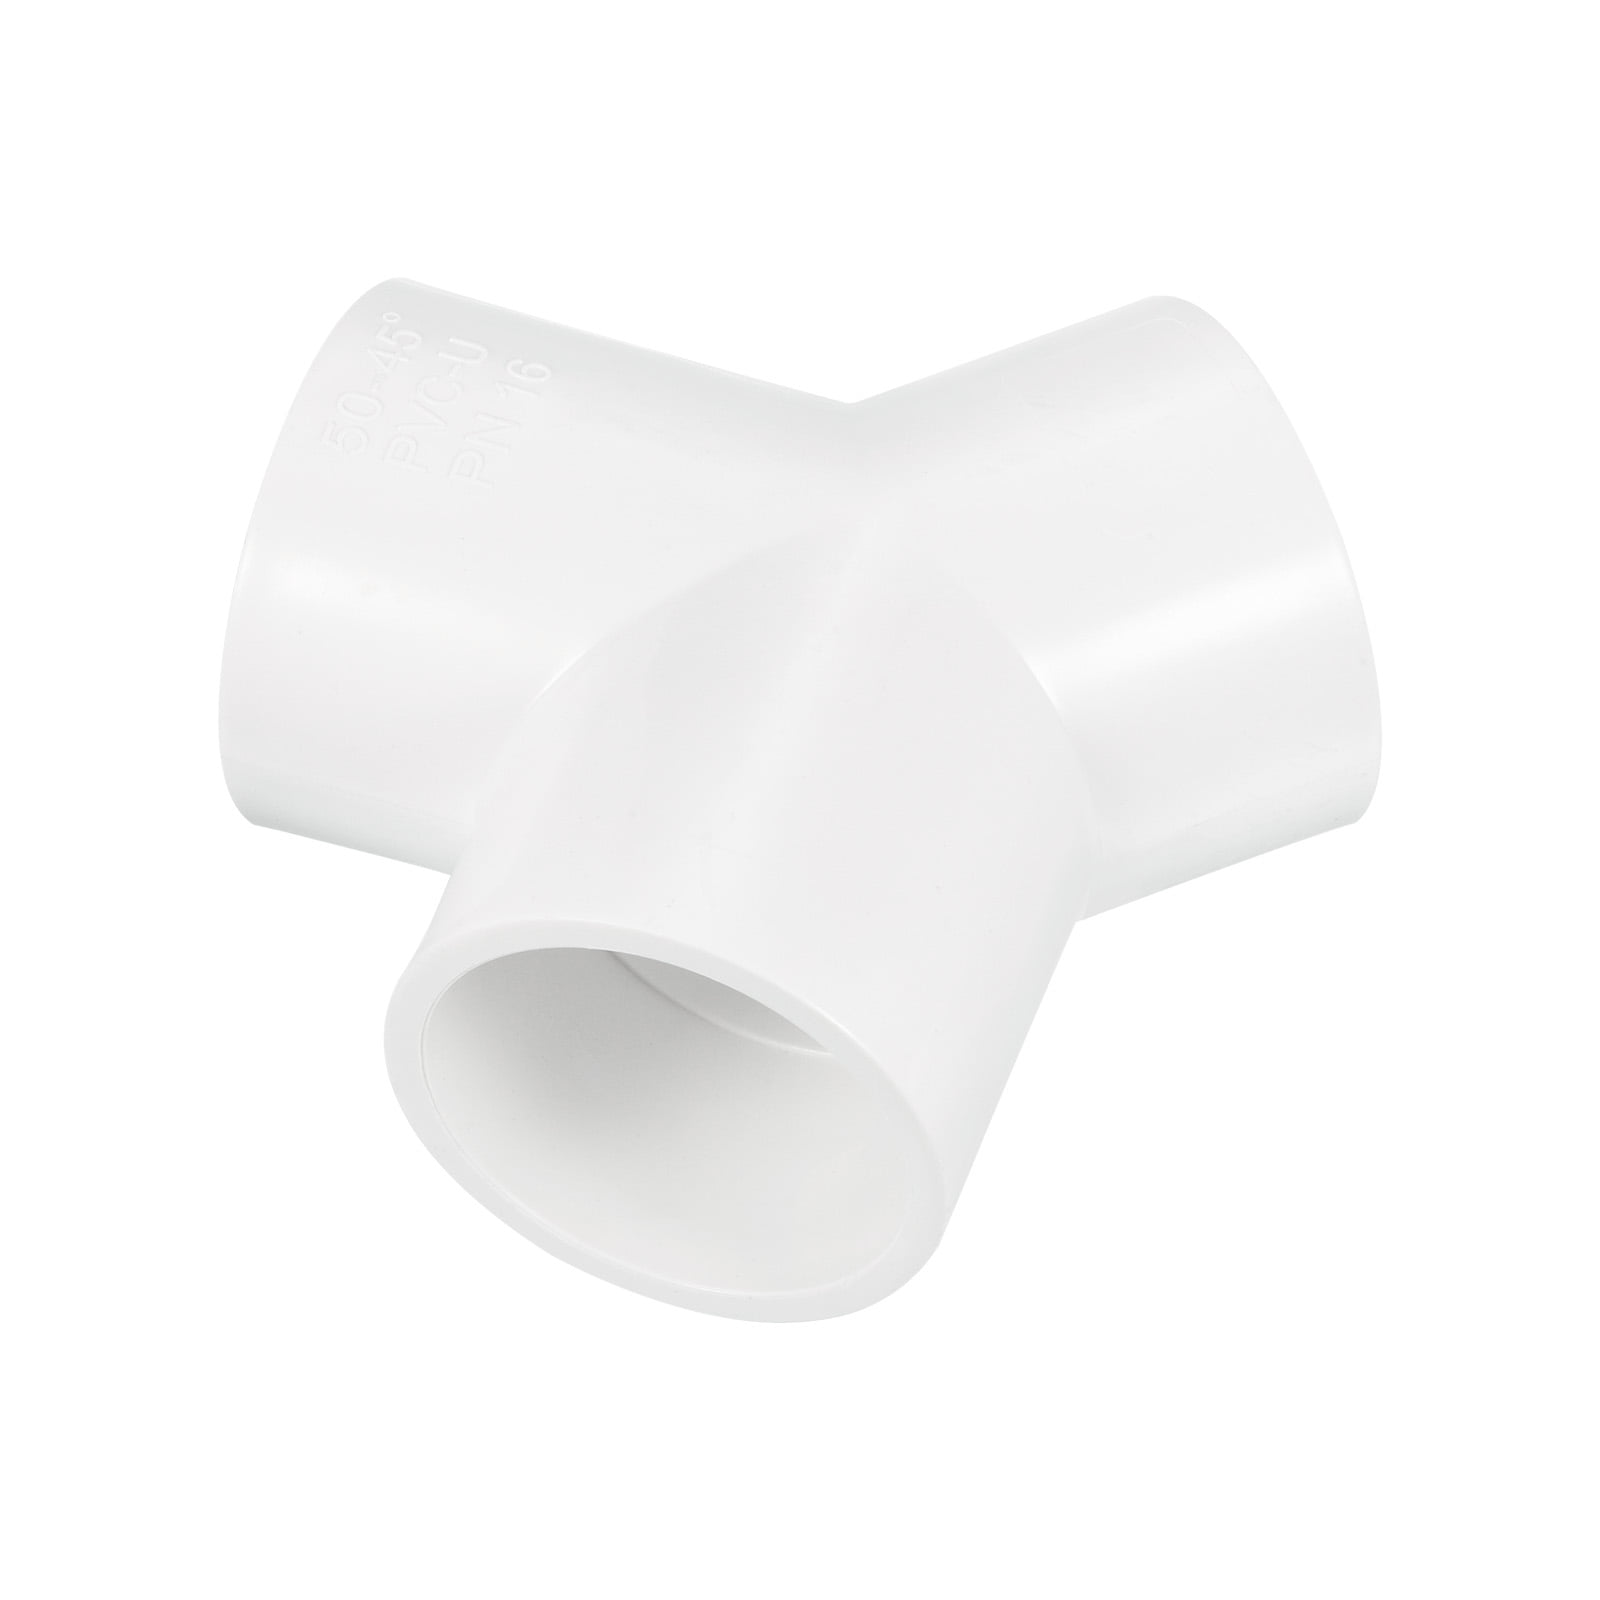 40mm x 32mm ID PVC Nipple Reducer Tube Joint Pipe Fitting Adapter